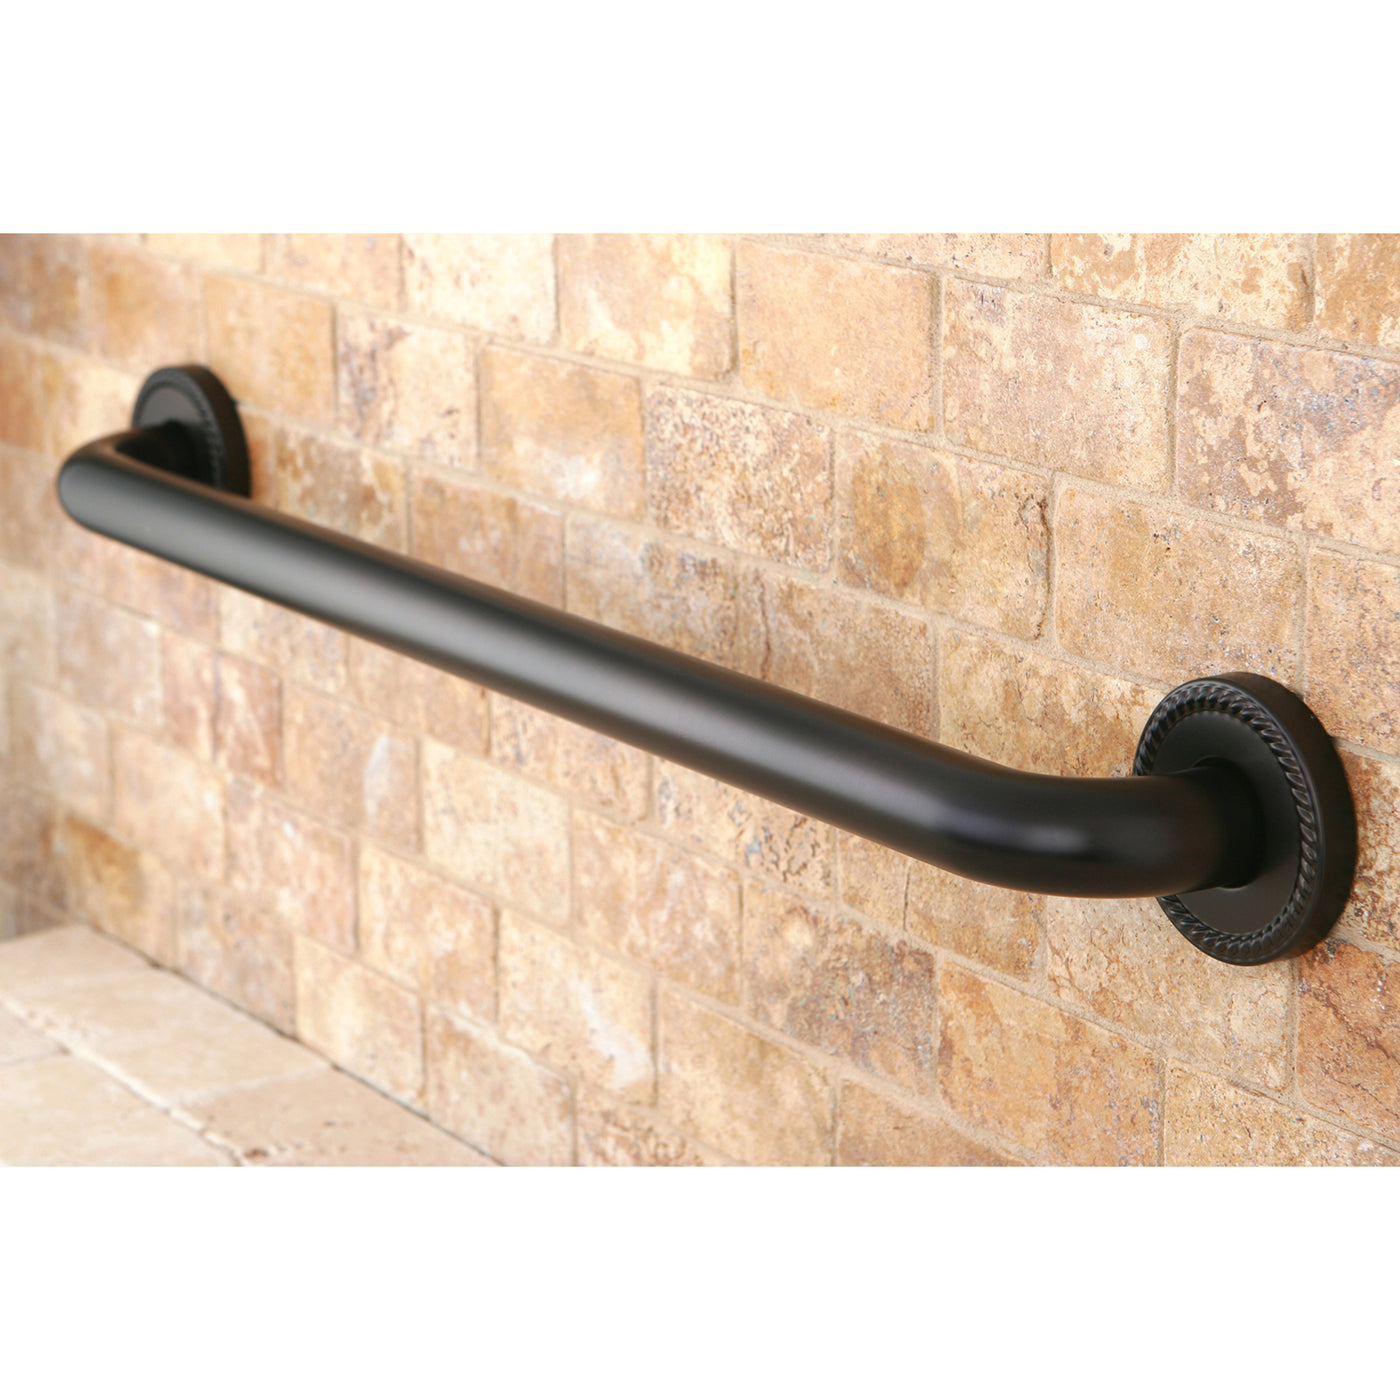 Elements of Design EDR814245 24-Inch x 1-1/4-Inch O.D Grab Bar, Oil Rubbed Bronze